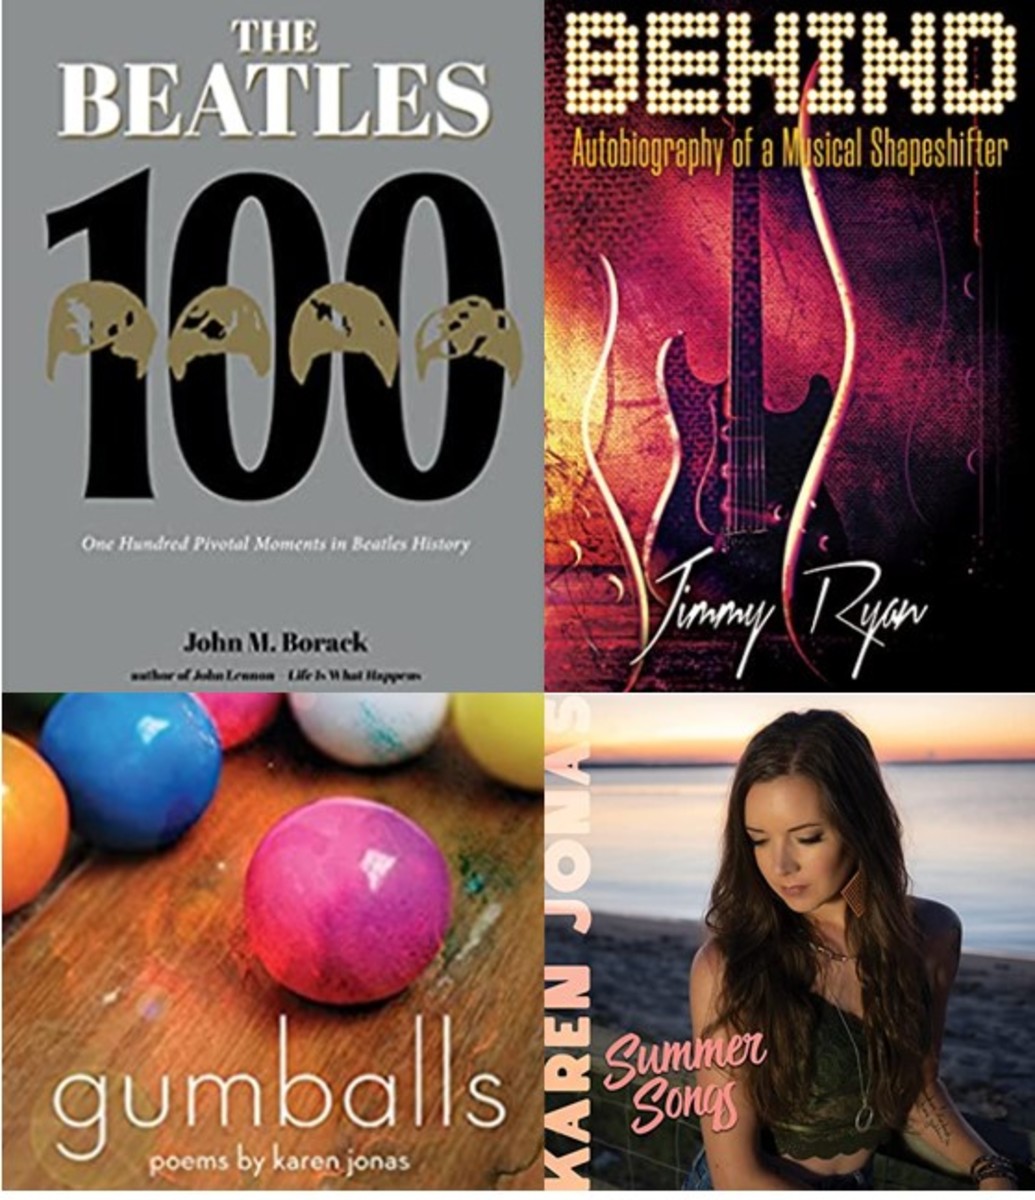 Fabulous Flip Sides of The Beatles, Carly Simon and Don Henley, with New  Books by John Borack, Jimmy Ryan and Karen Jonas - Goldmine Magazine:  Record Collector & Music Memorabilia